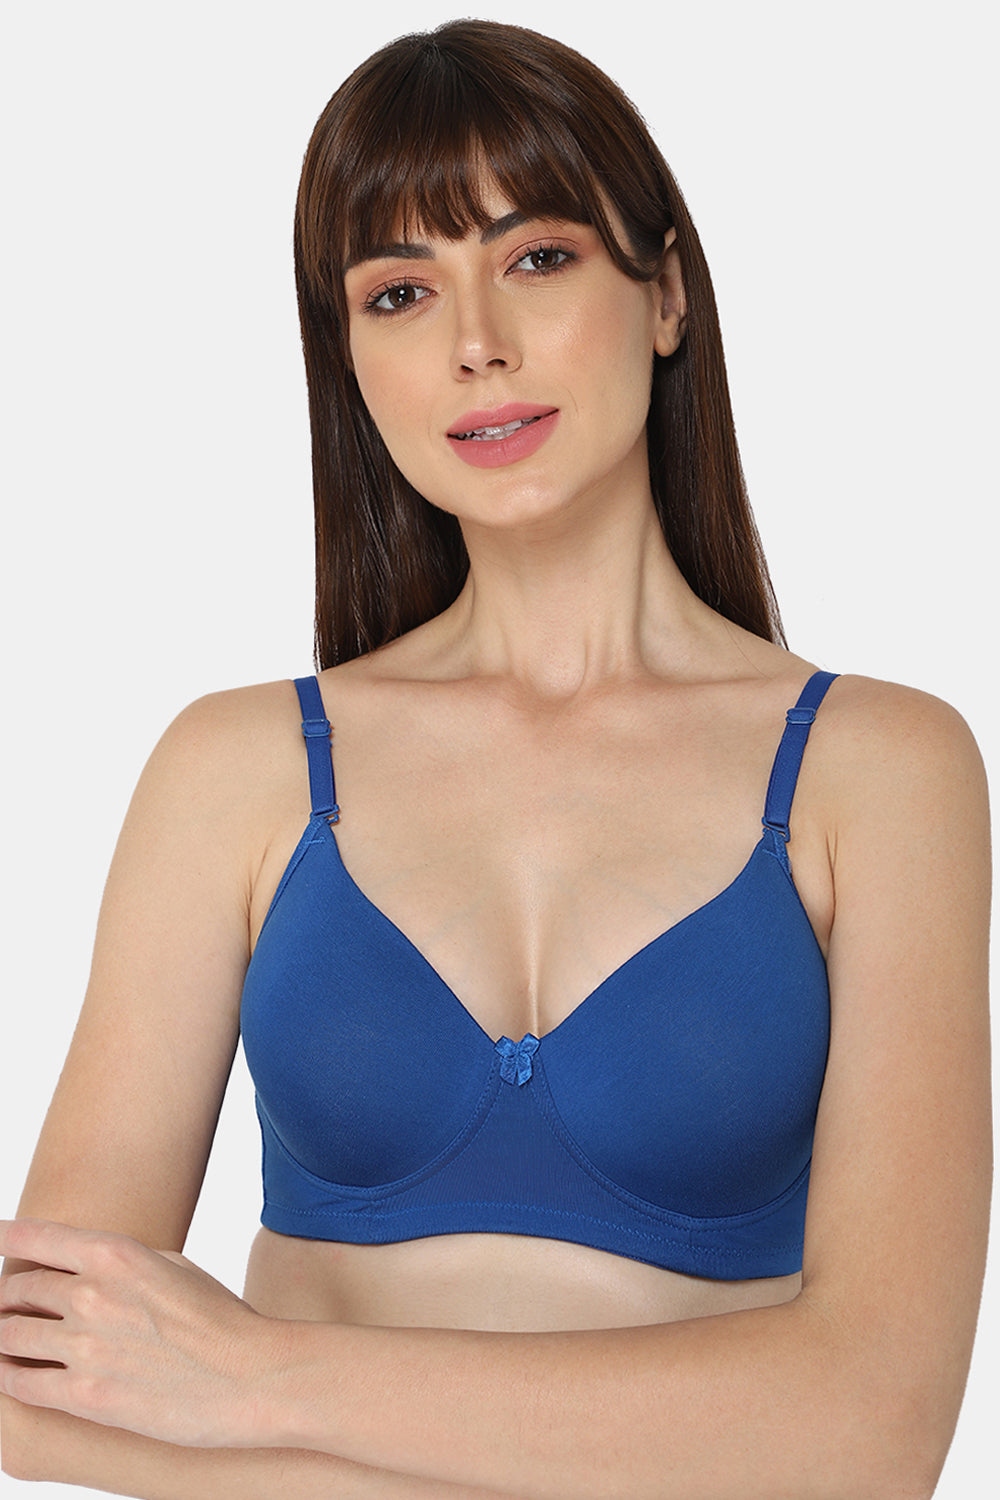 Padded Bras - Buy Padded Bras Online By Color, Size & Price